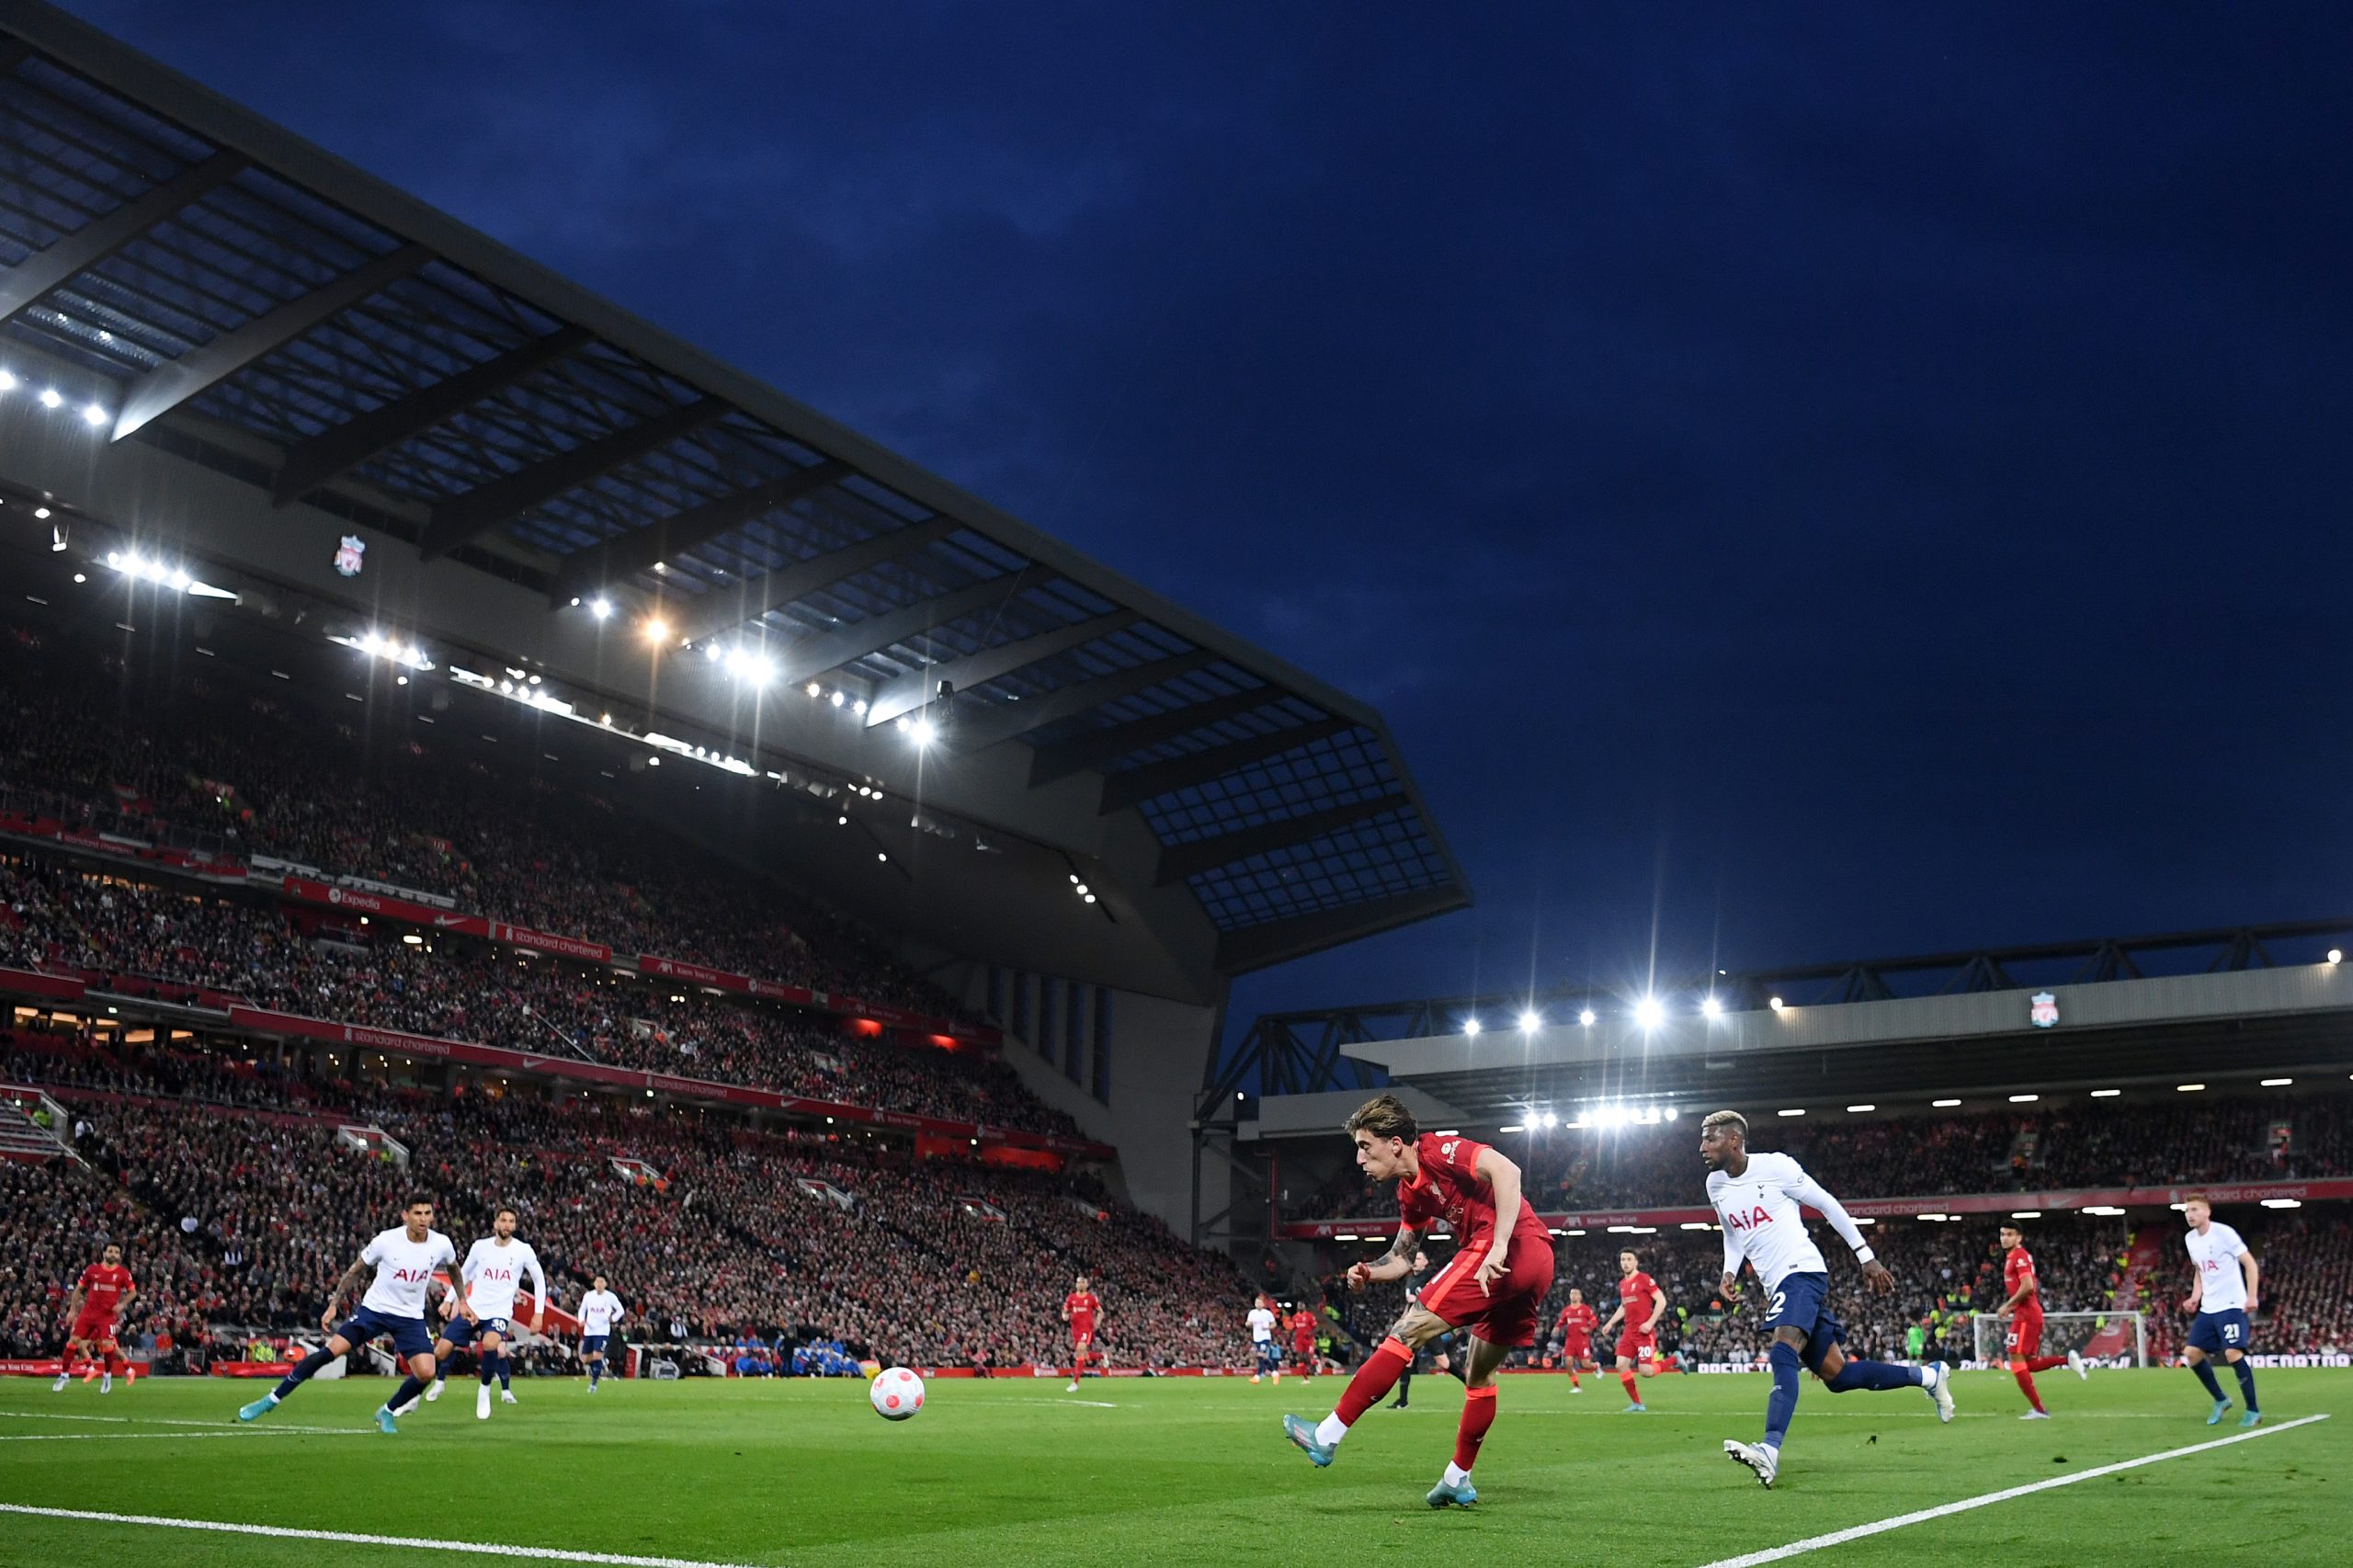 Anfield (Liverpool)